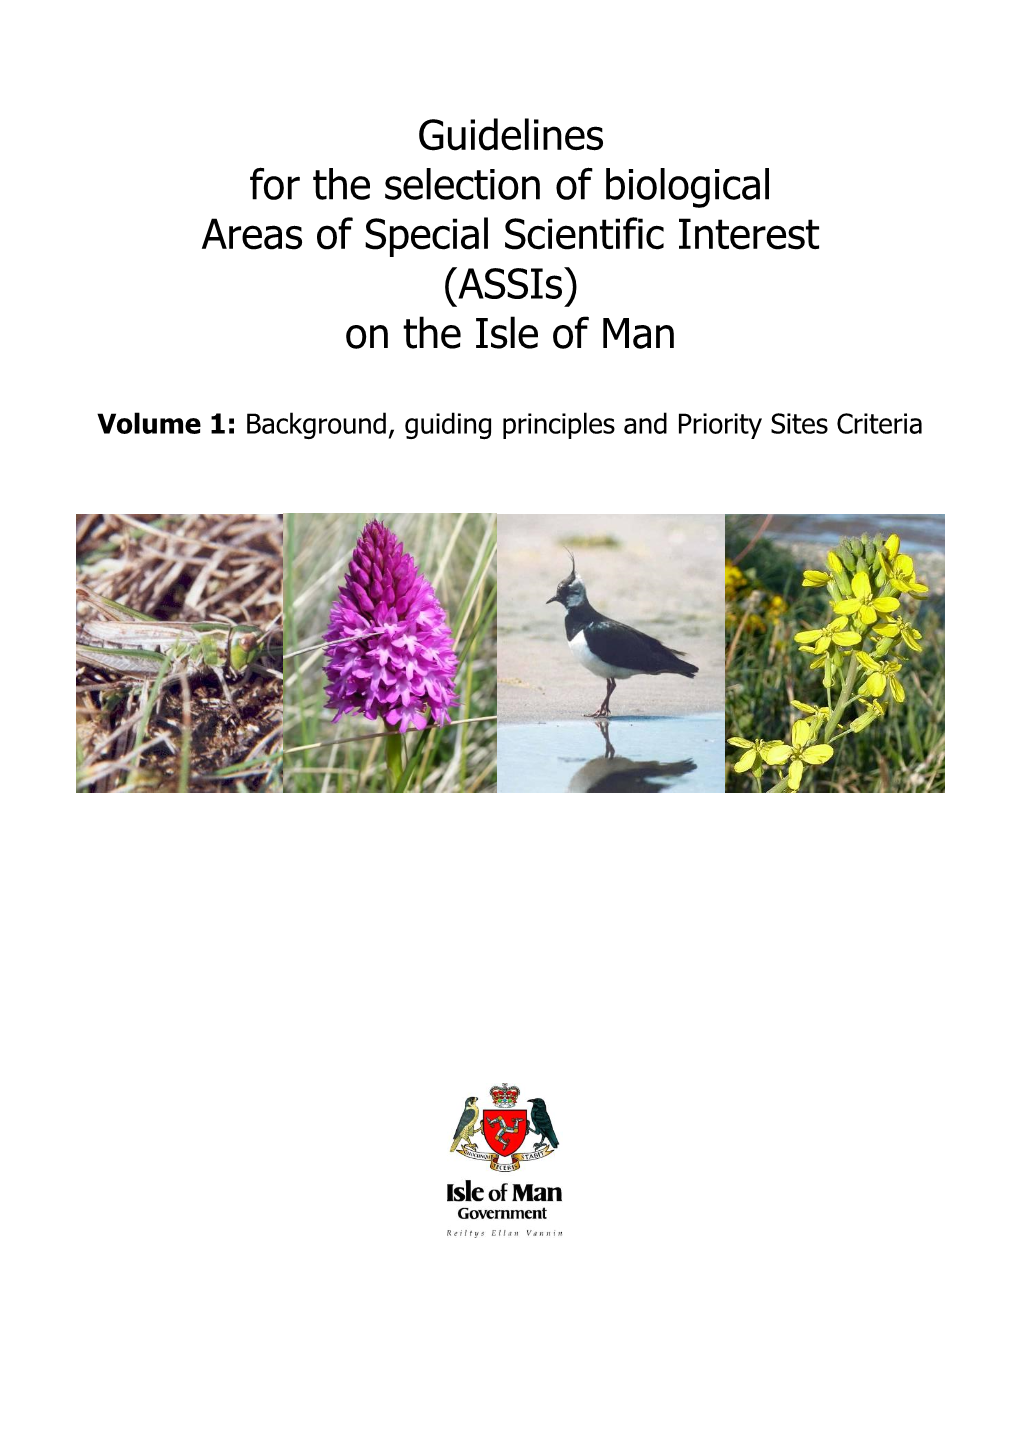 Guidelines for the Selection of Biological Areas of Special Scientific Interest (Assis) on the Isle of Man